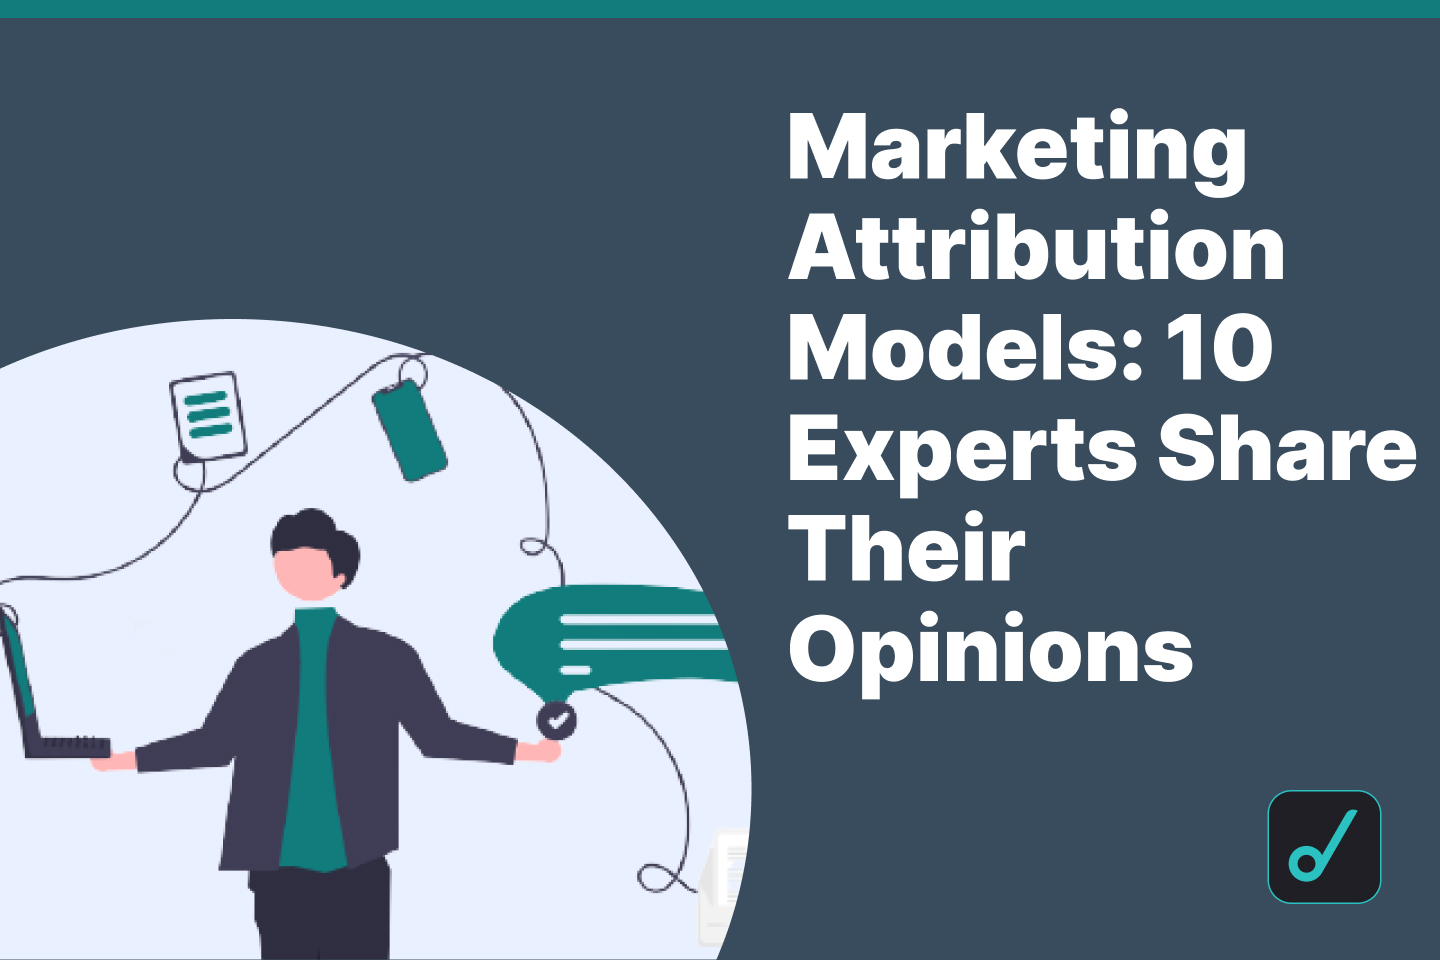 Here’s What 10 SaaS Marketers Have to Say About Marketing Attribution